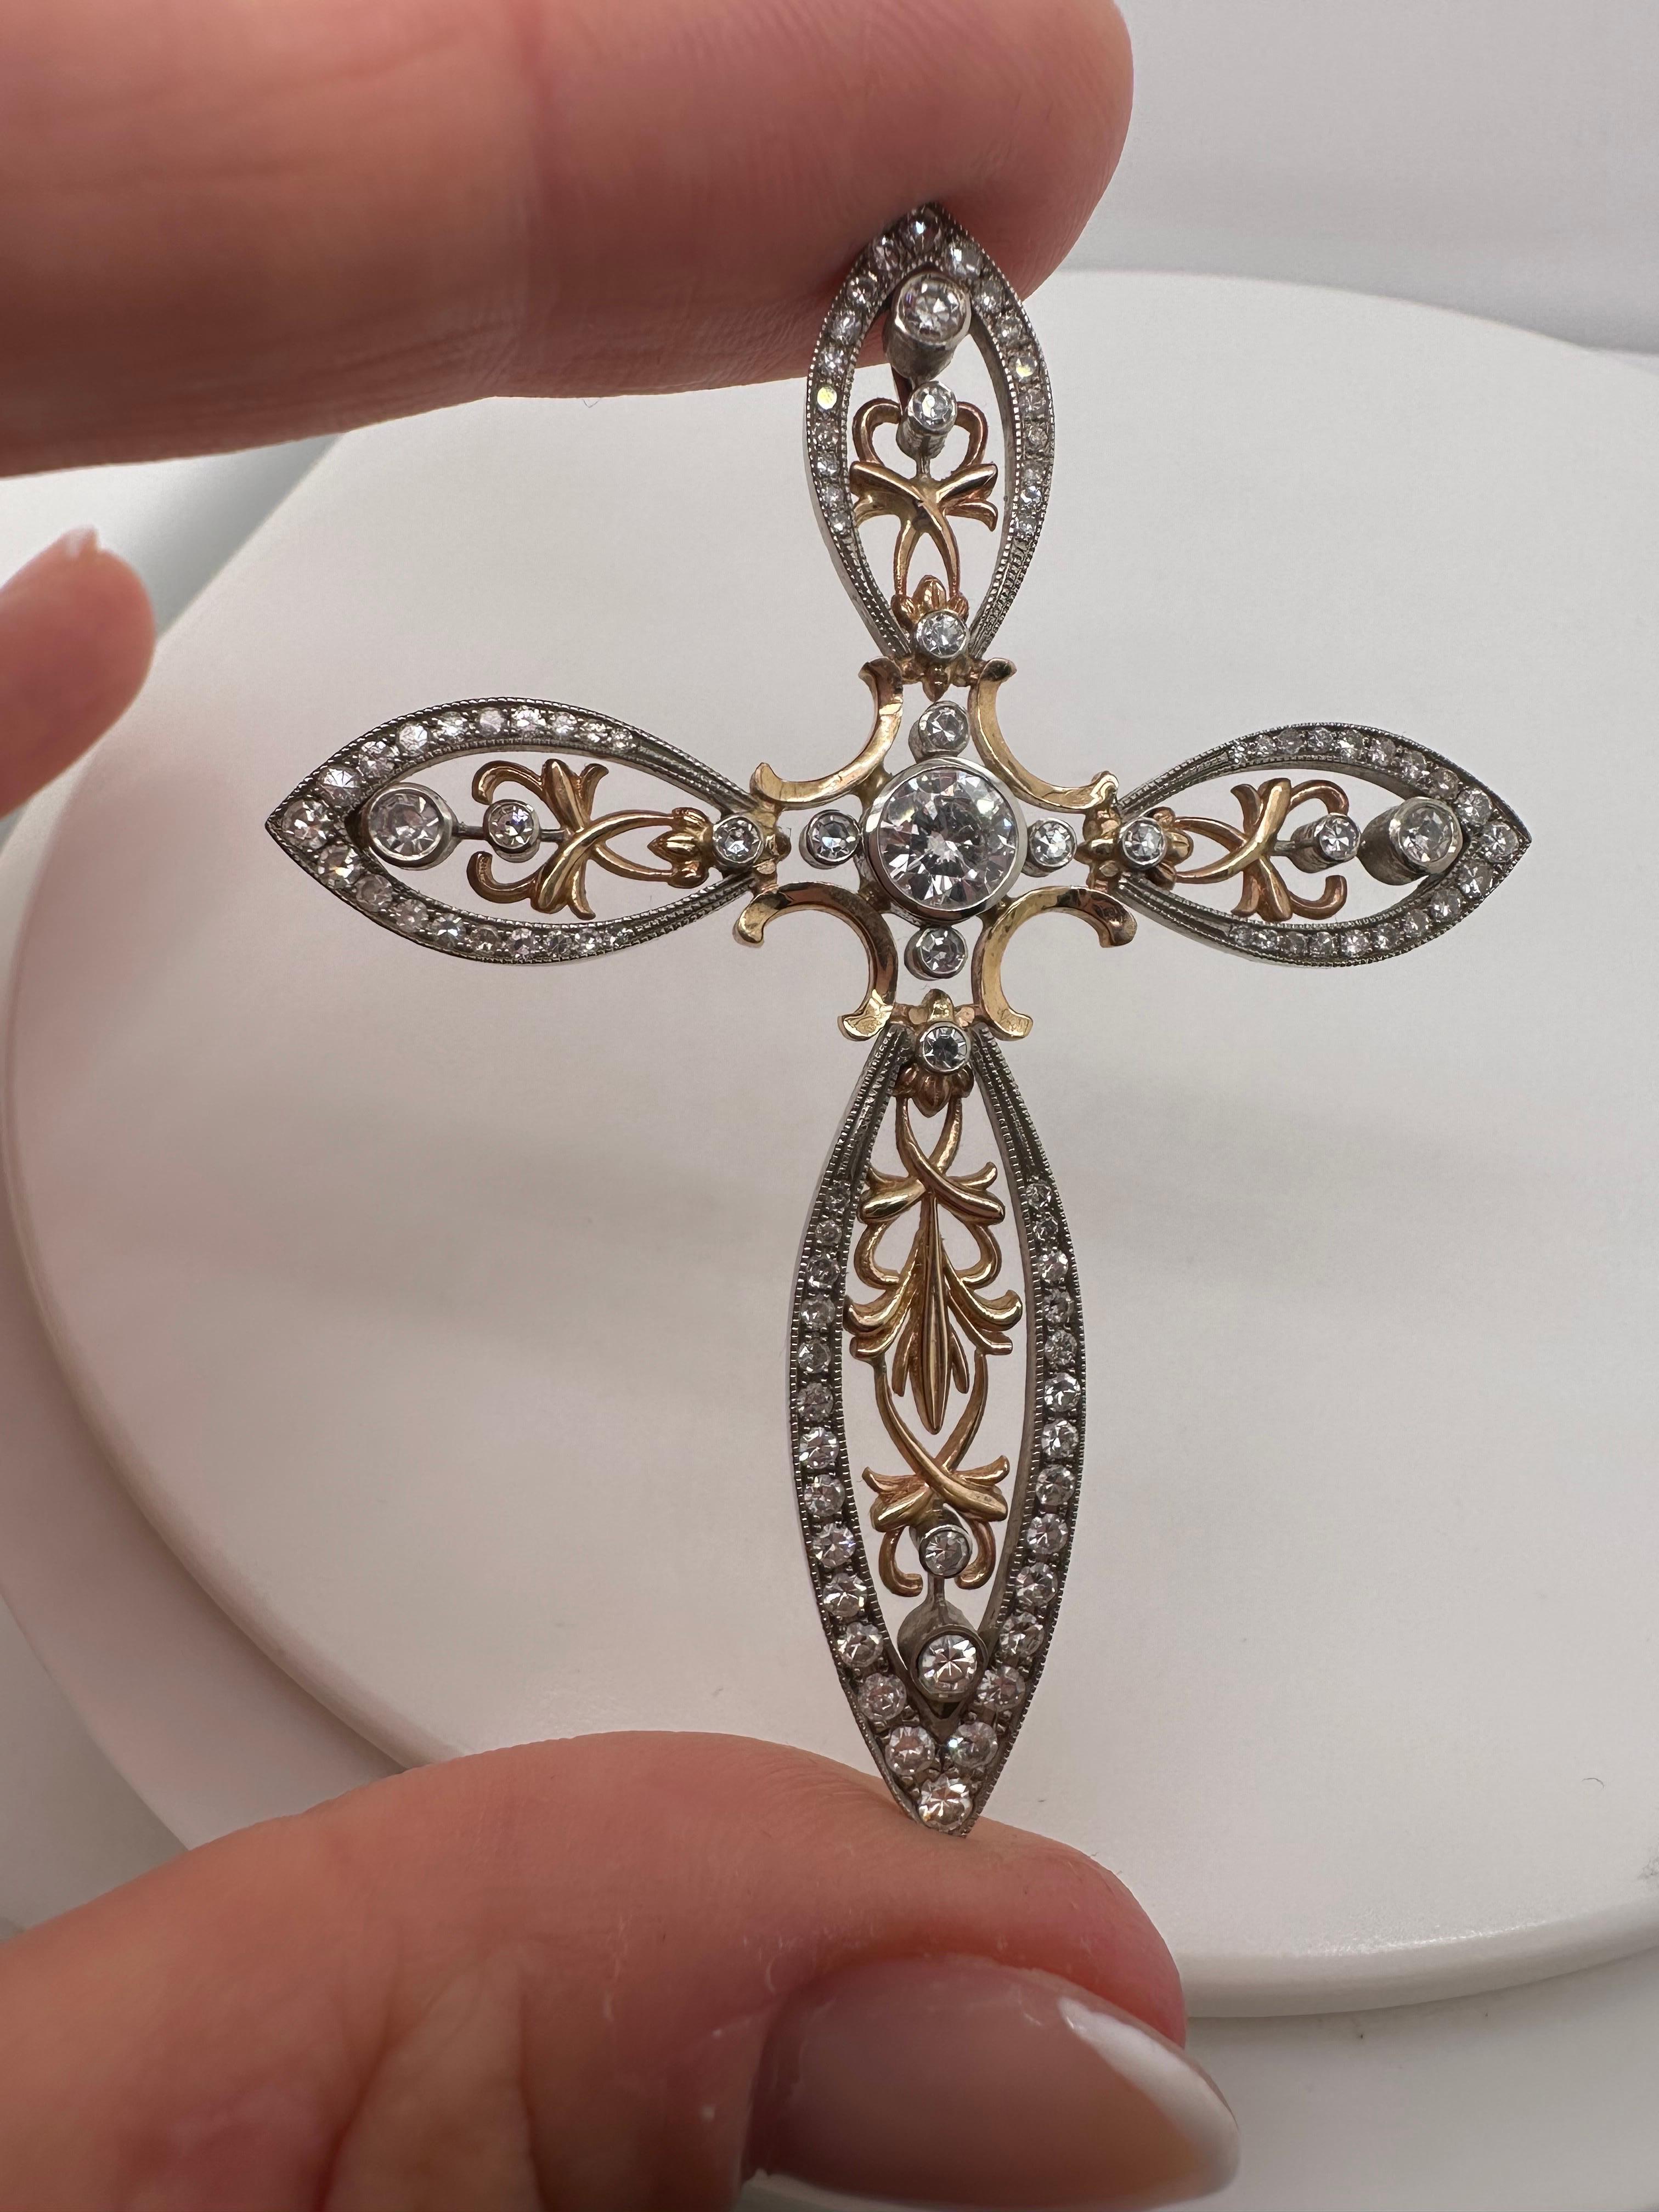 Cross ready to be shipped. The cross is made of mutliple parts of white and rose gold with round brilliant cut and single cut diamonds. Stunning piece with oustanding craftmanship, designer unknown and year unknown.


DETAILS:
NATURAL